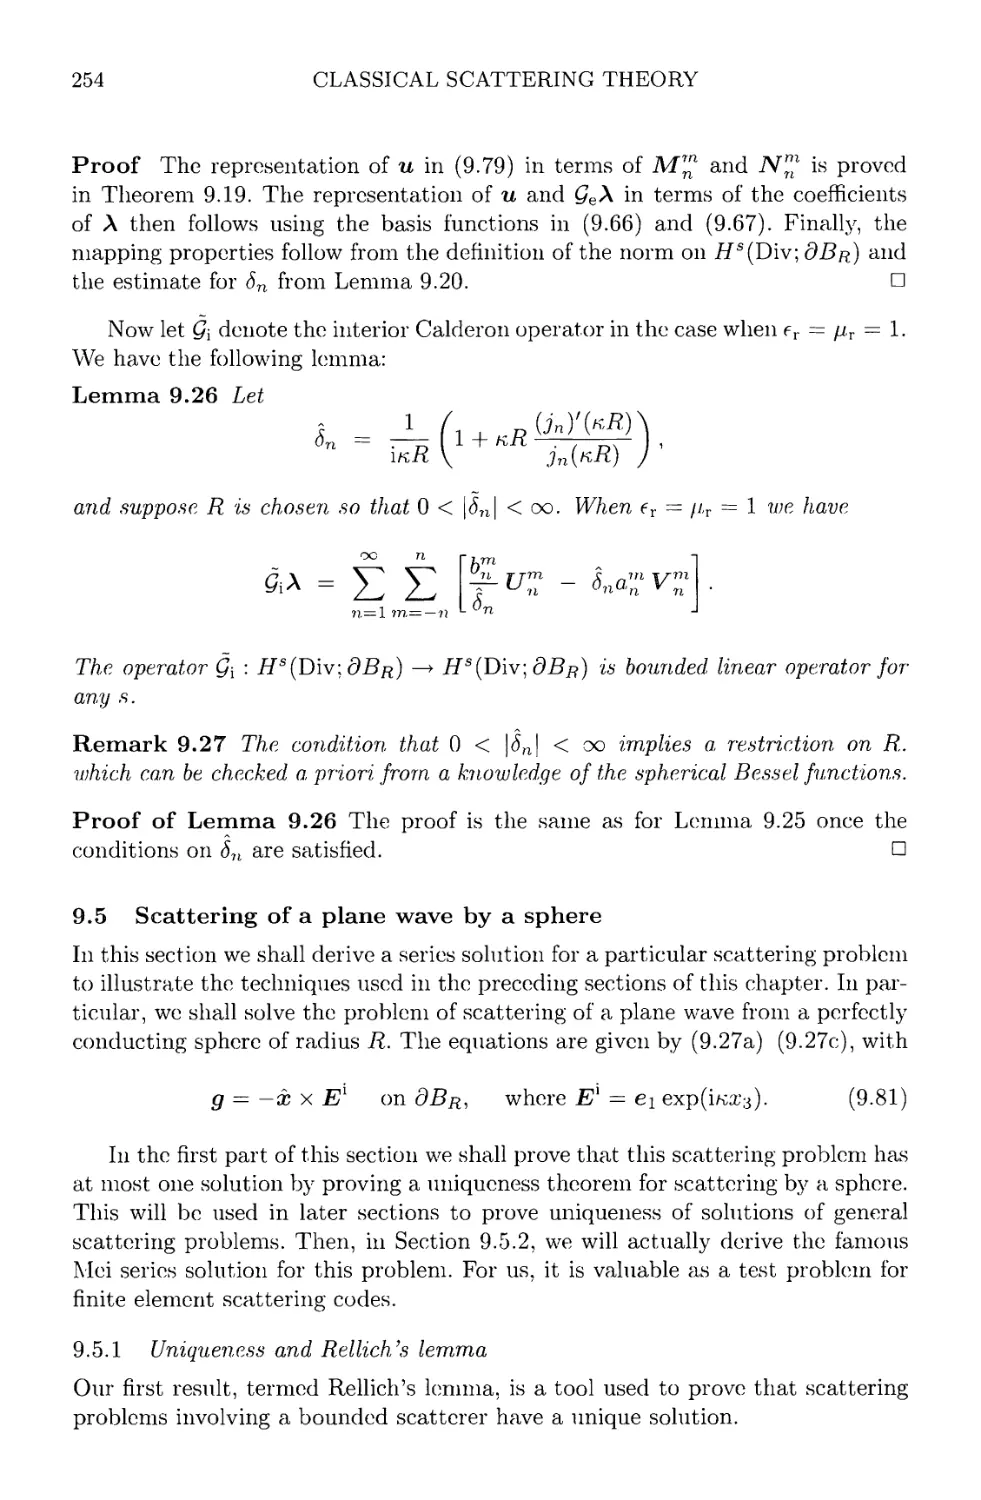 9.5 Scattering of a plane wave by a sphere